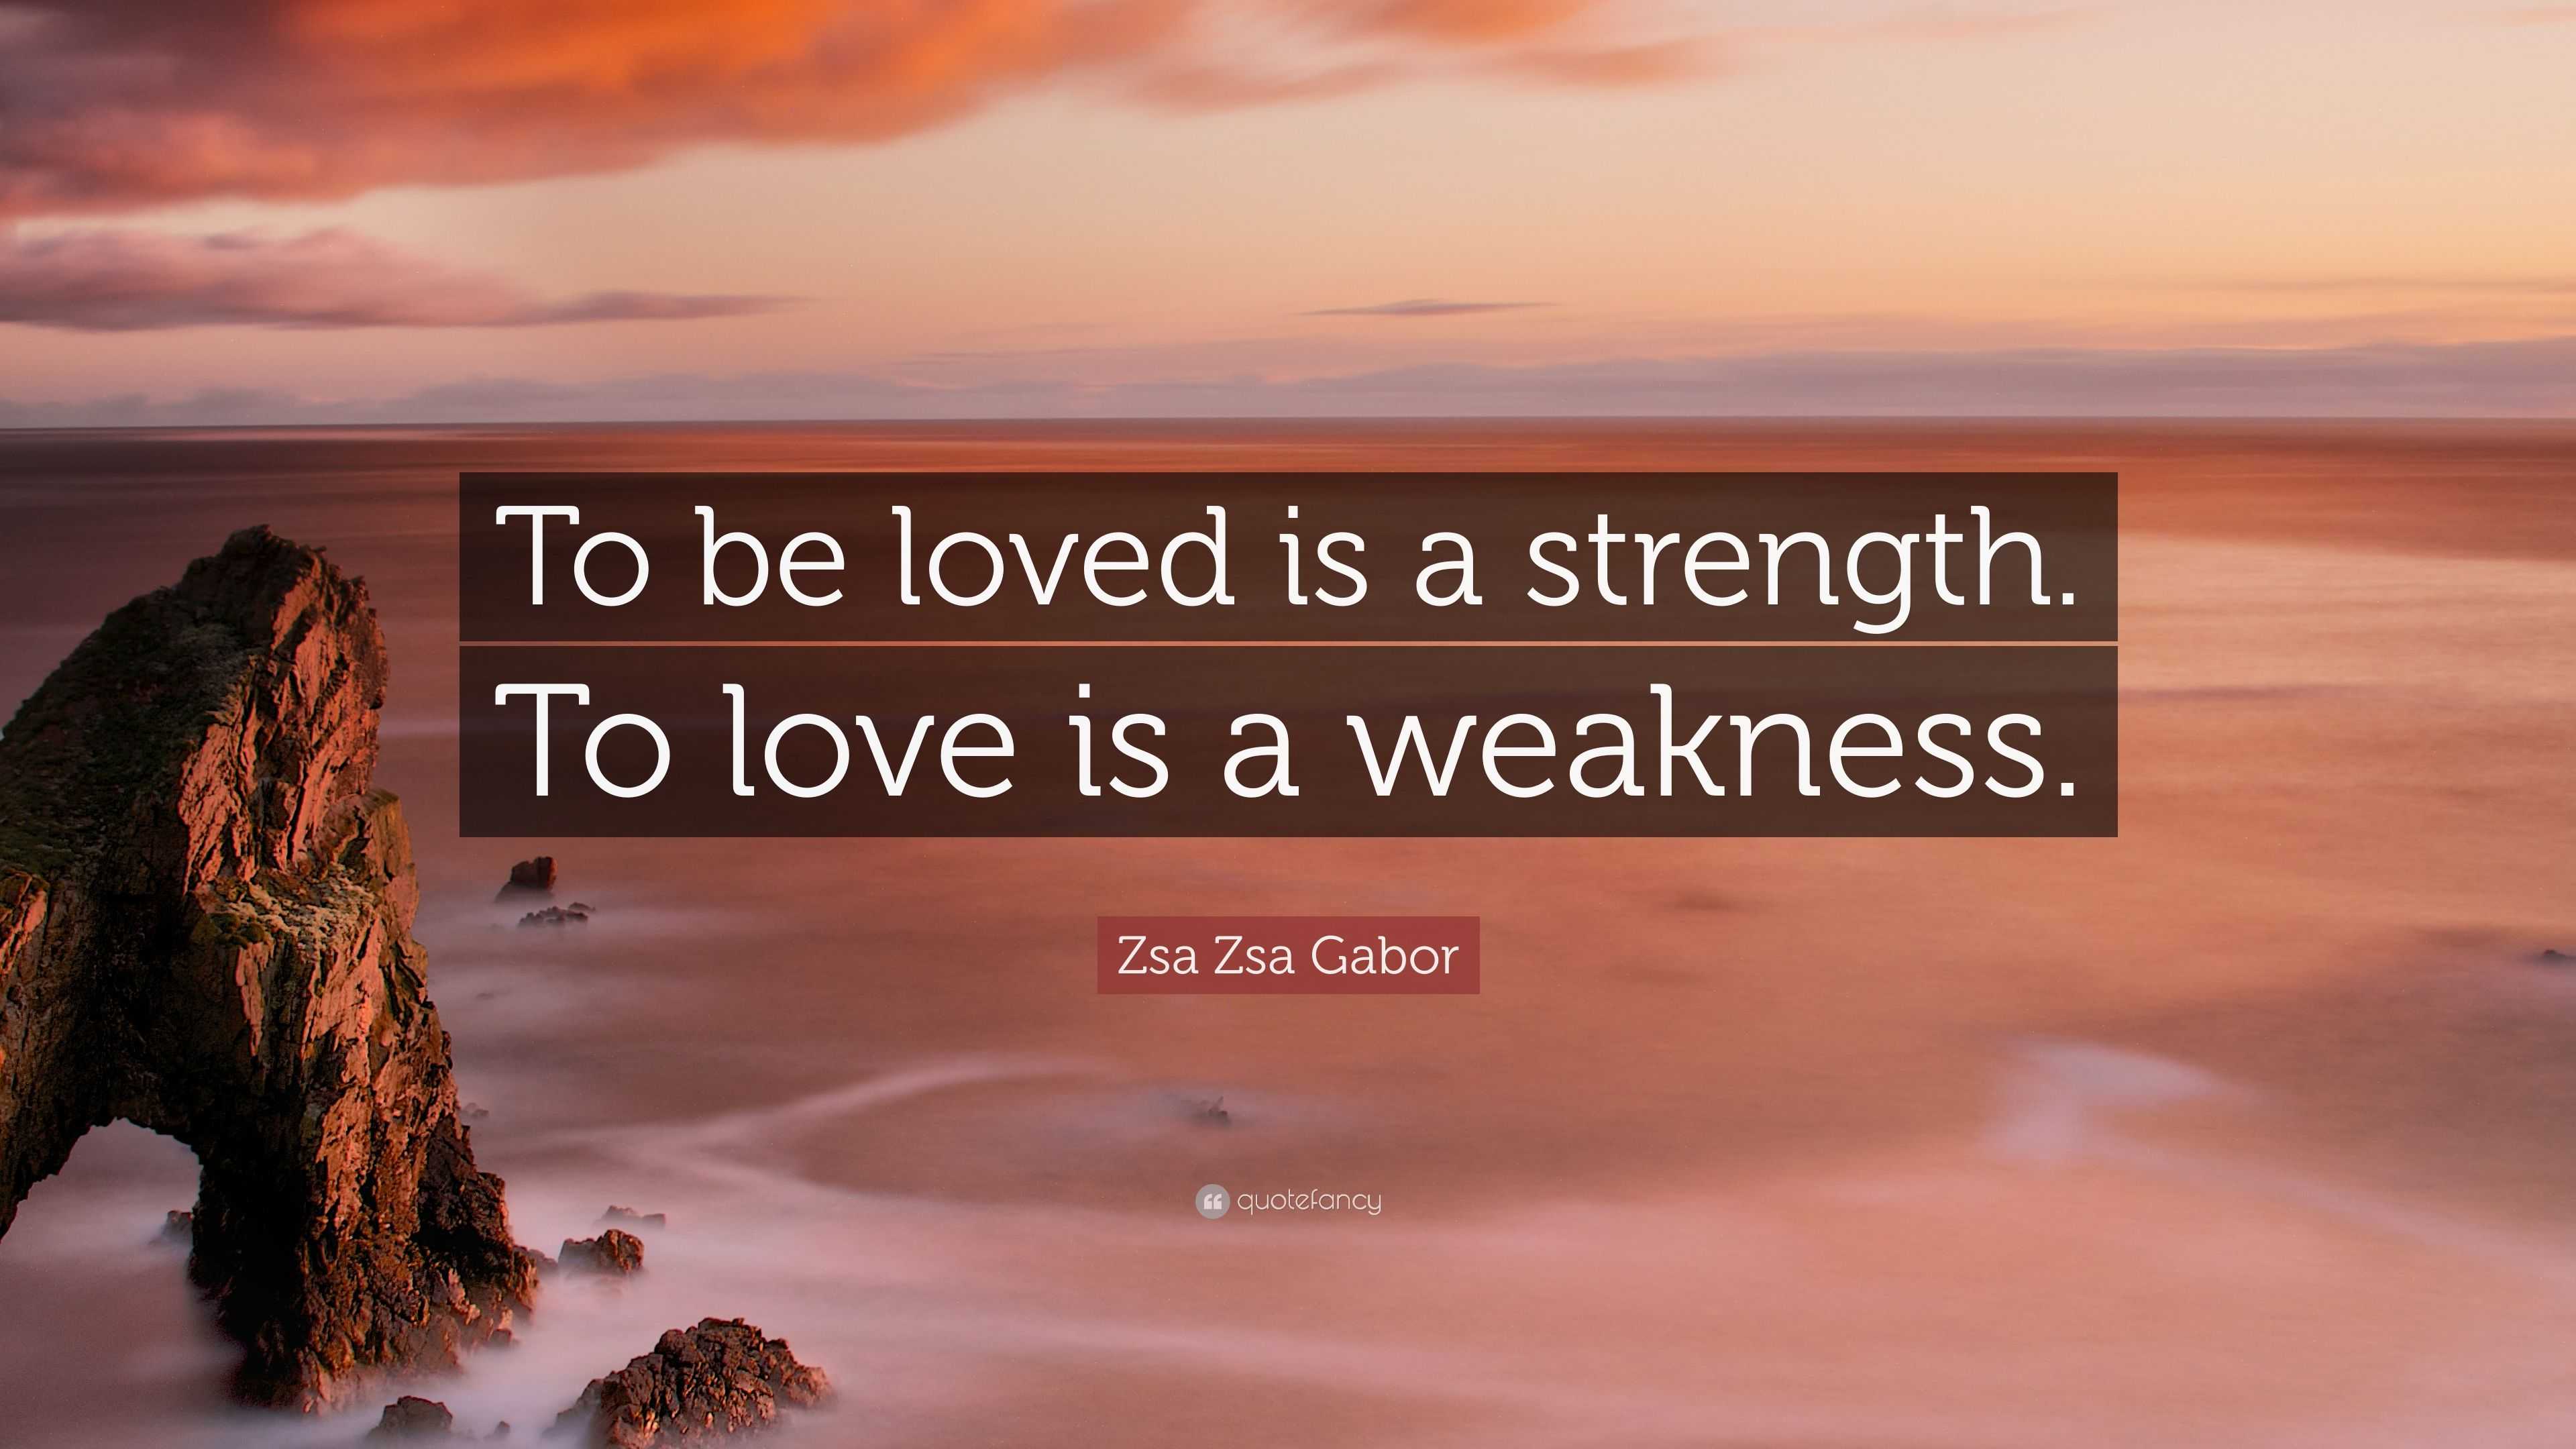 is love a weakness or strength